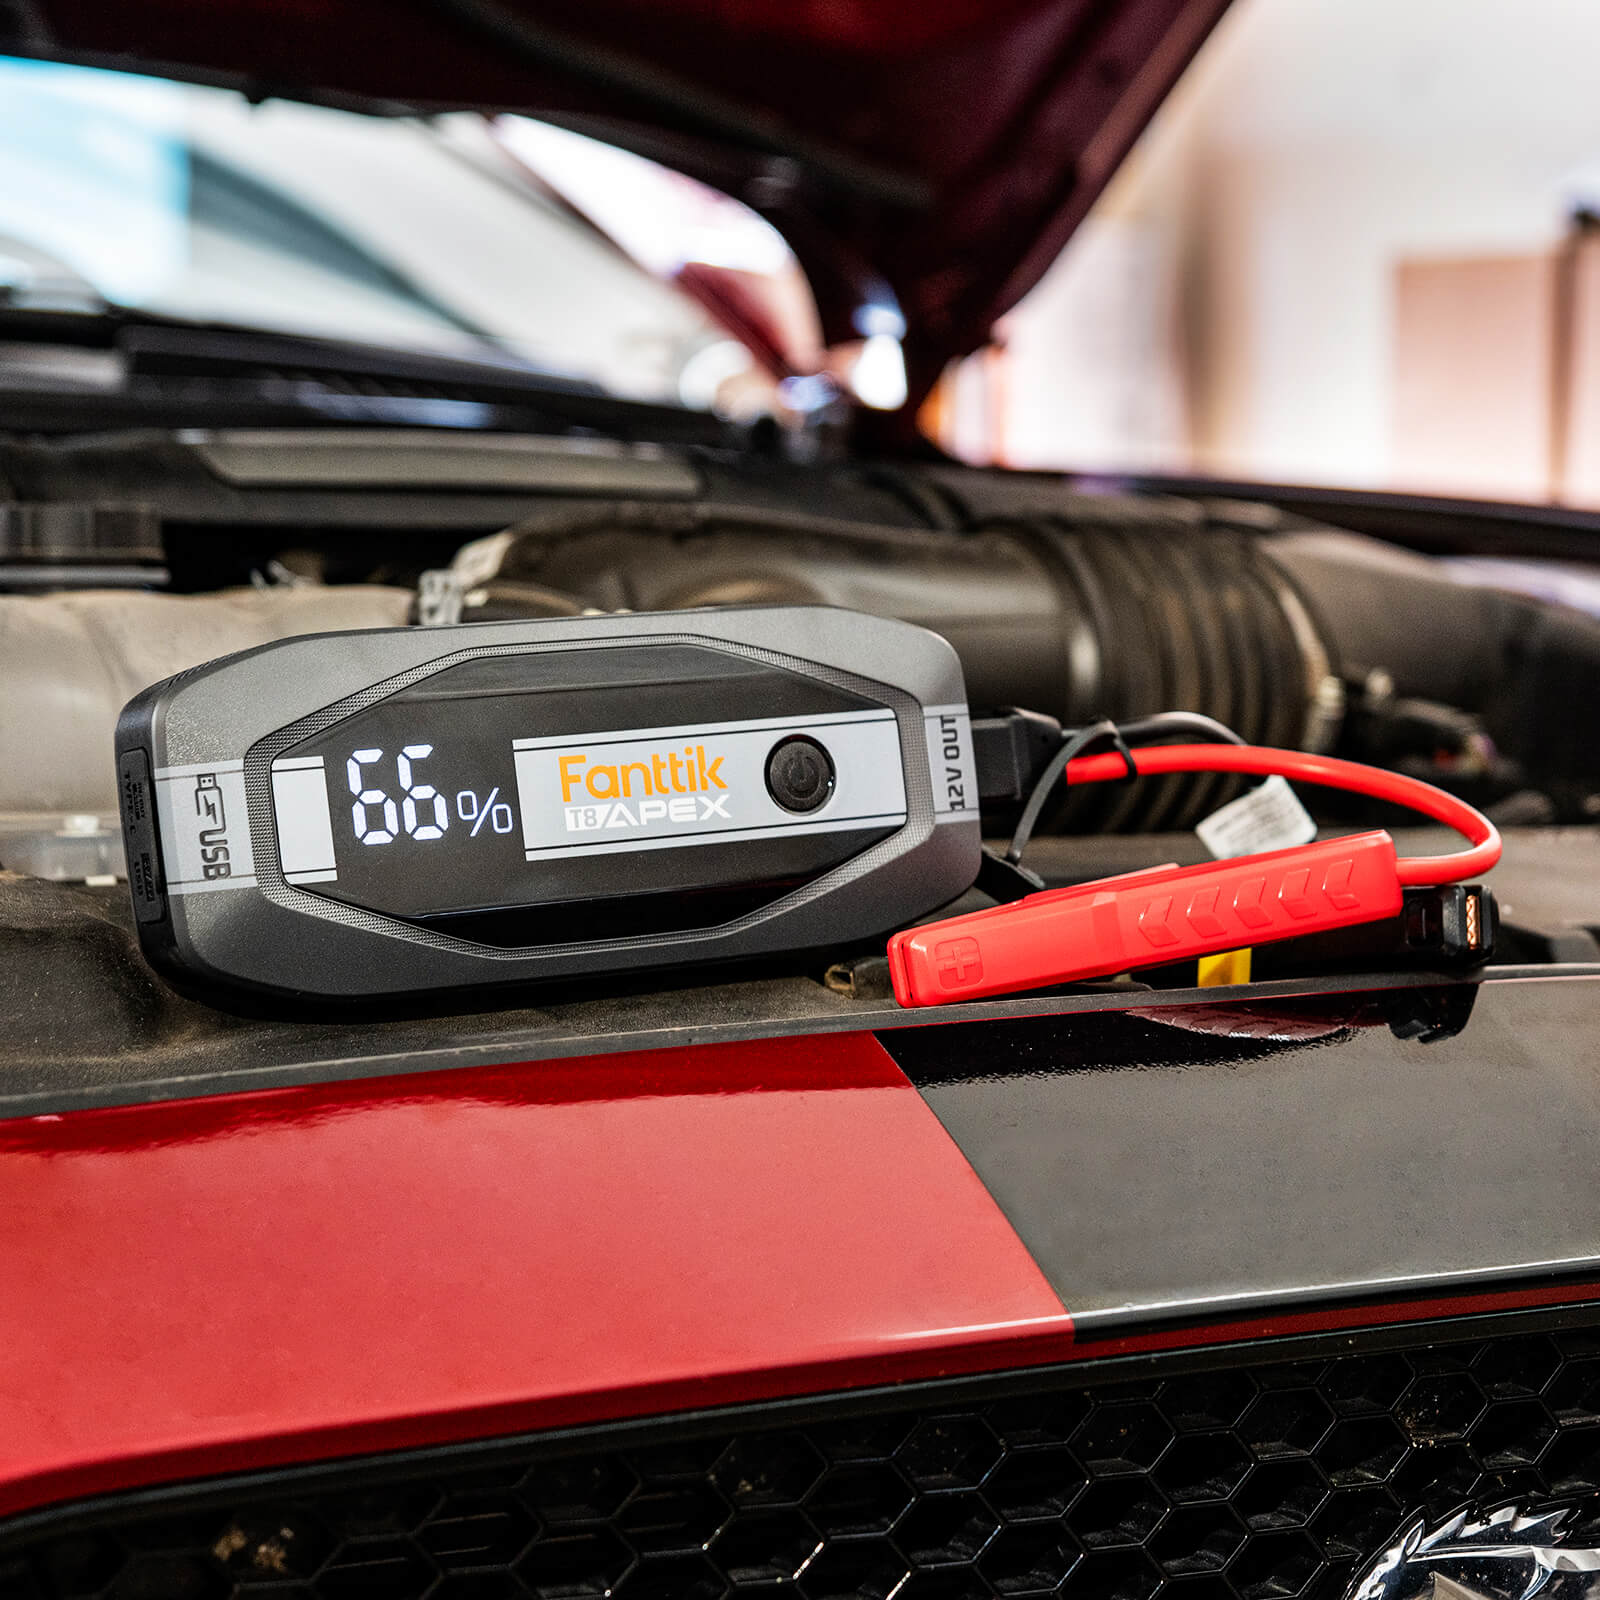 T8 Jump Starter Highly portable and very easy to use. Simply clamp on, press the button, and fire the engine.